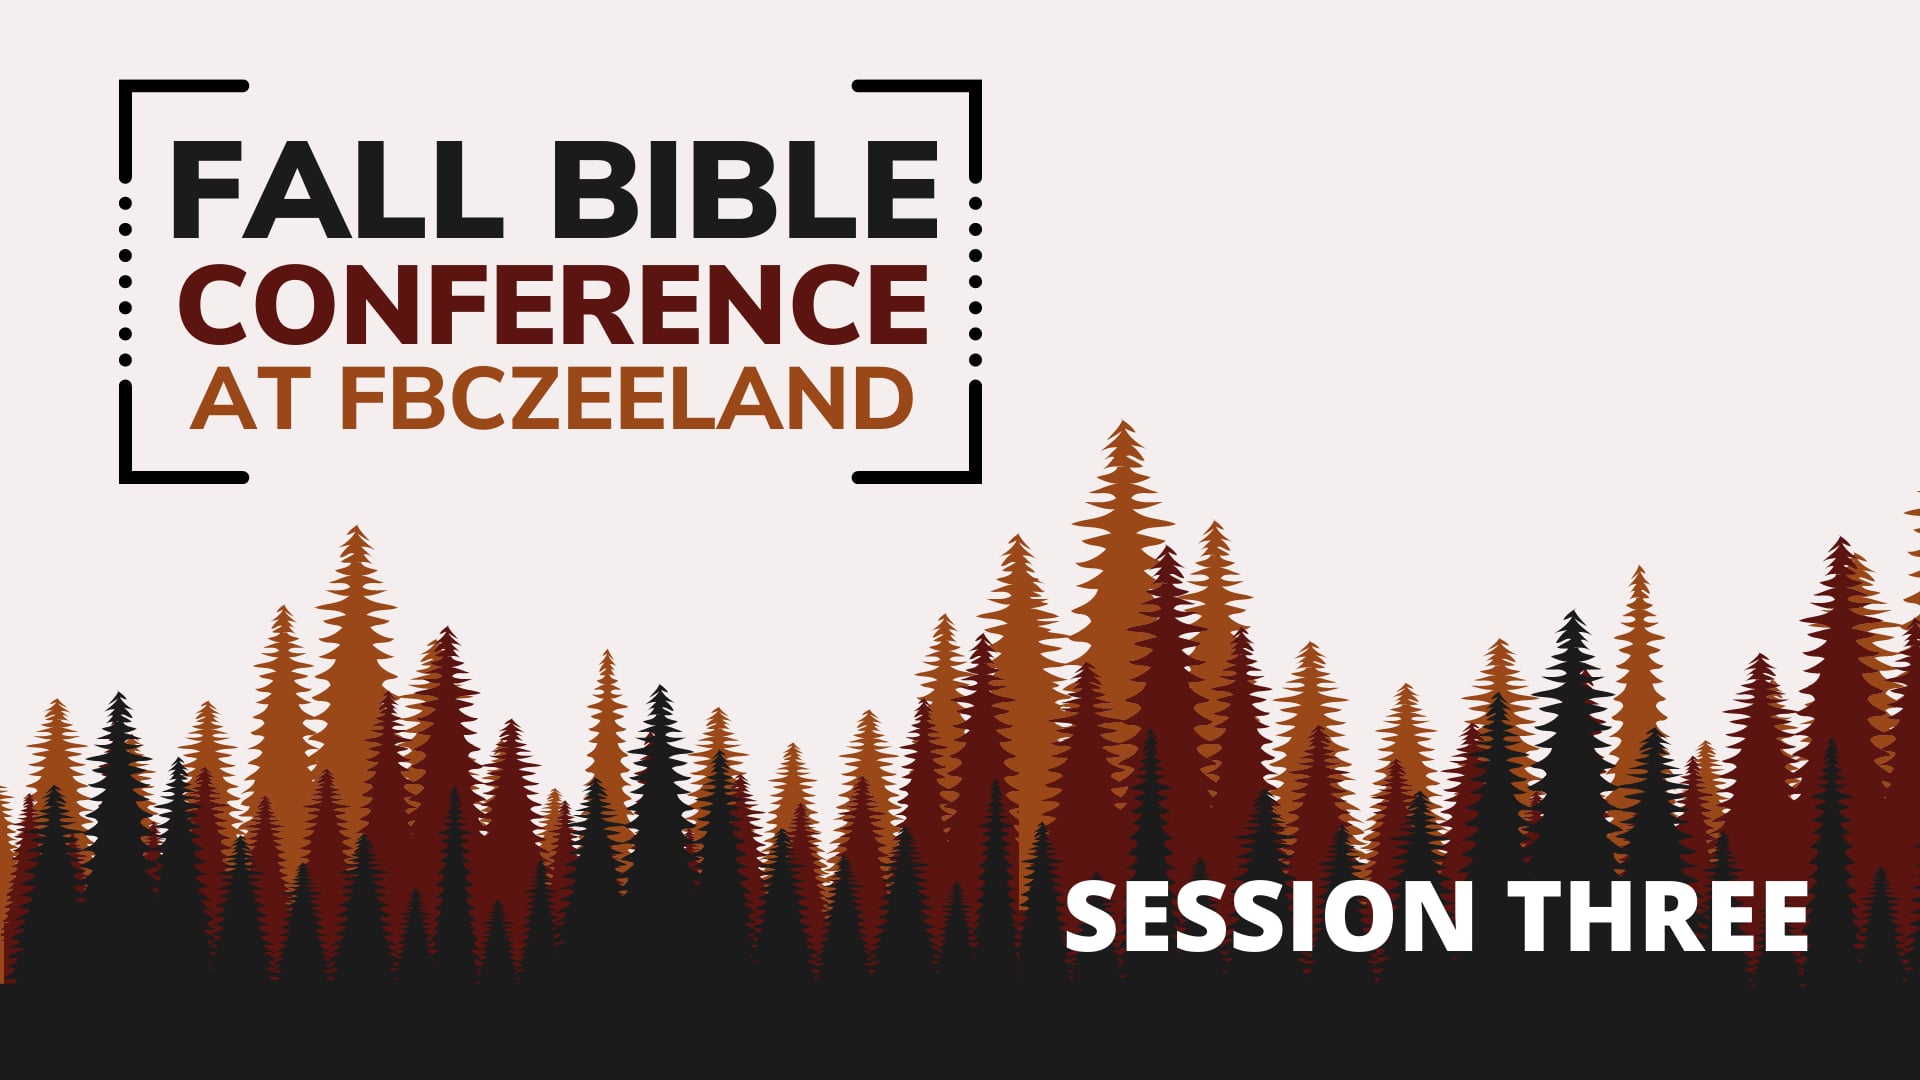 FBC Fall Bible Conference Session 3